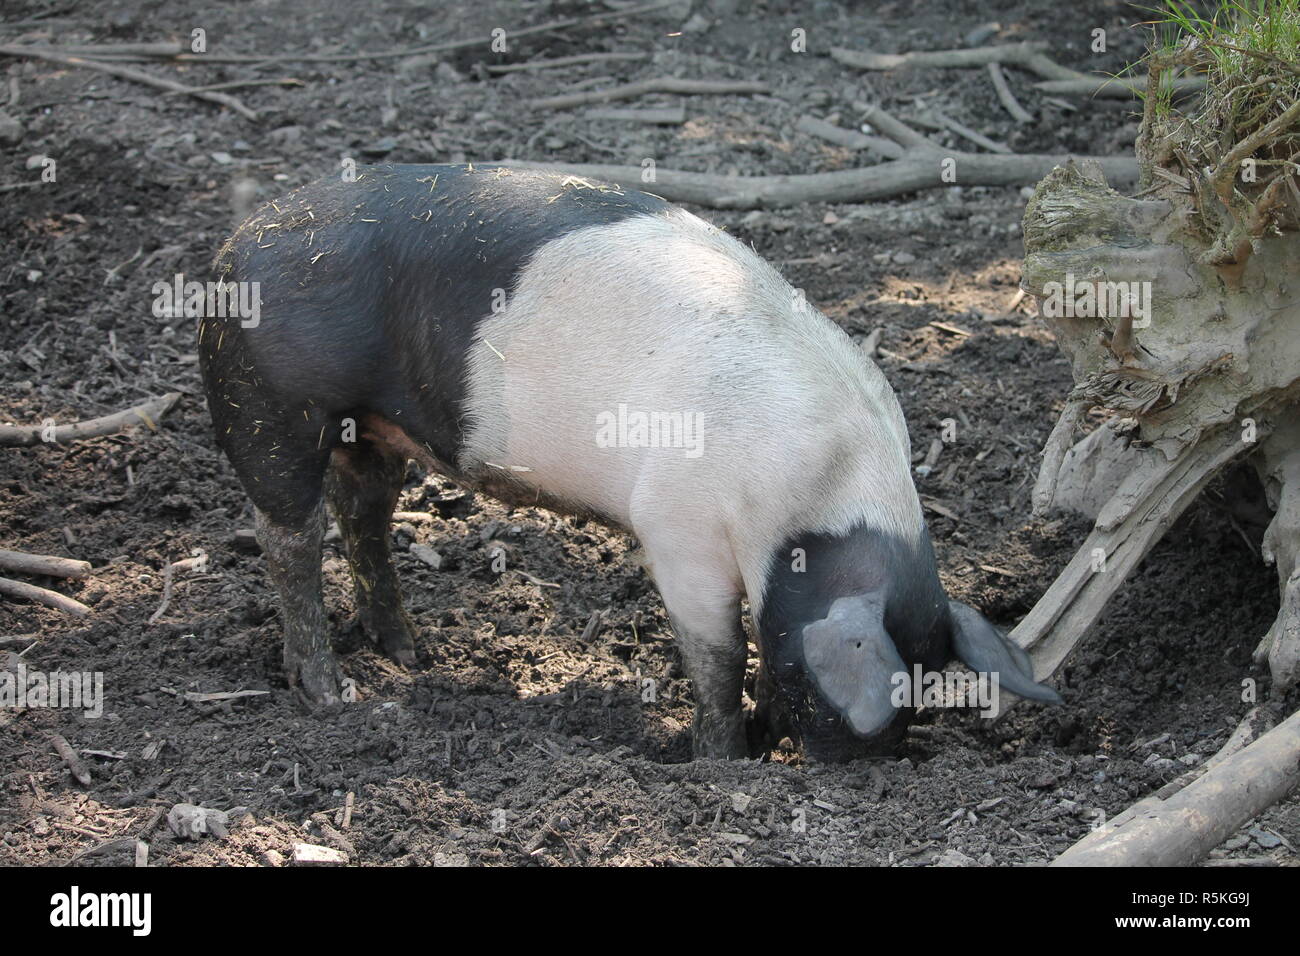 The domestic pig often called swine, hog, or simply pig. Stock Photo